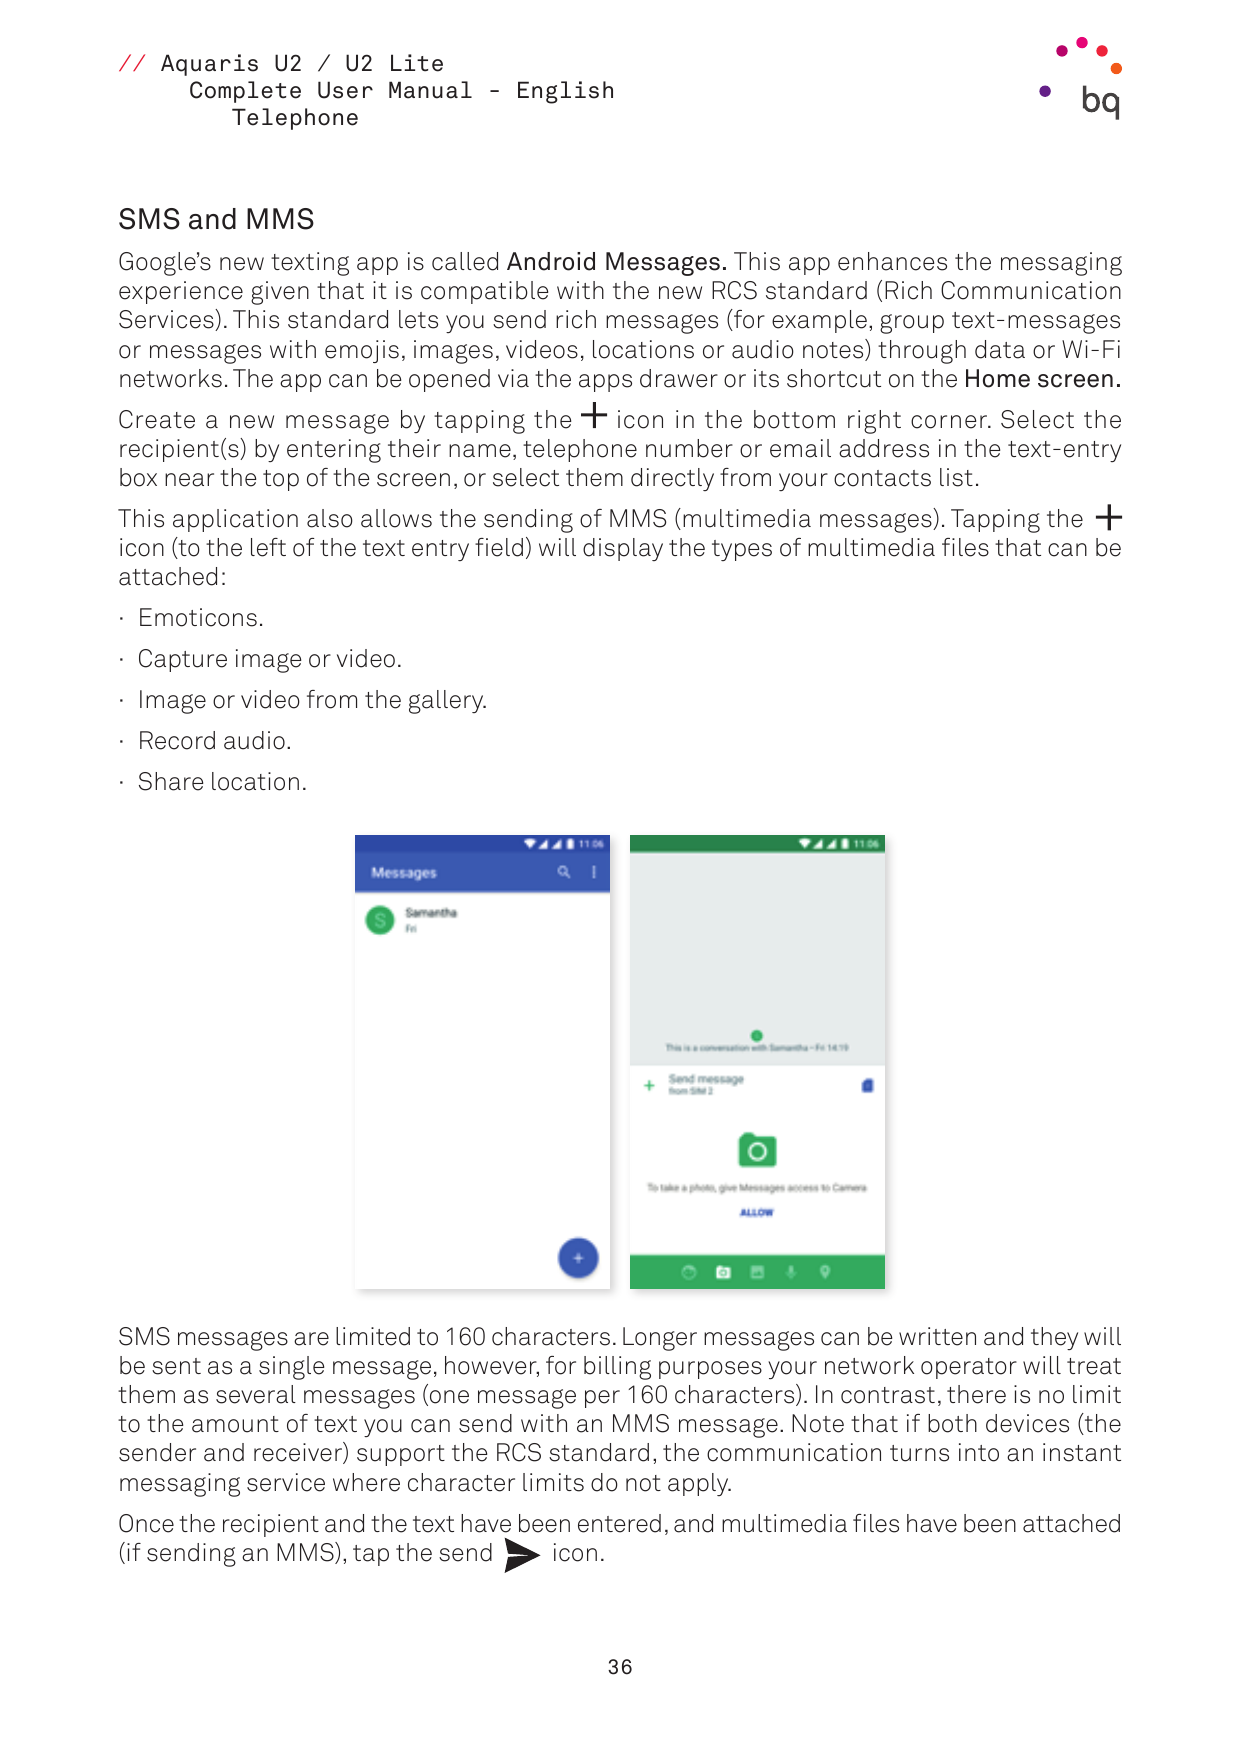 // Aquaris U2 / U2 LiteComplete User Manual - EnglishTelephoneSMS and MMSGoogle’s new texting app is called Android Messages. Th